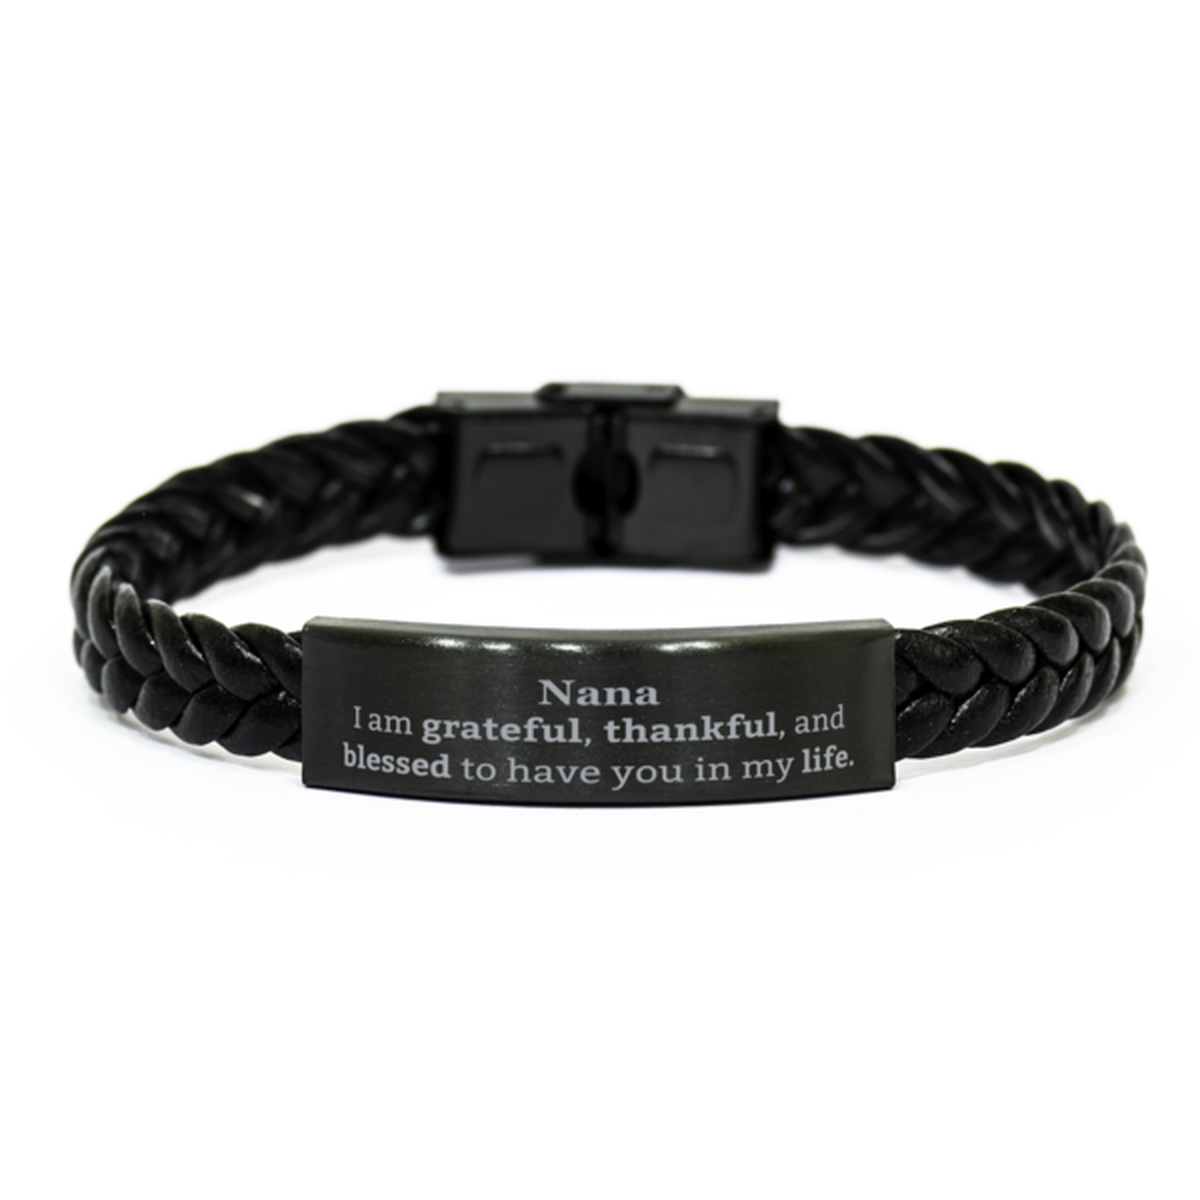 Nana Appreciation Gifts, I am grateful, thankful, and blessed, Thank You Braided Leather Bracelet for Nana, Birthday Inspiration Gifts for Nana